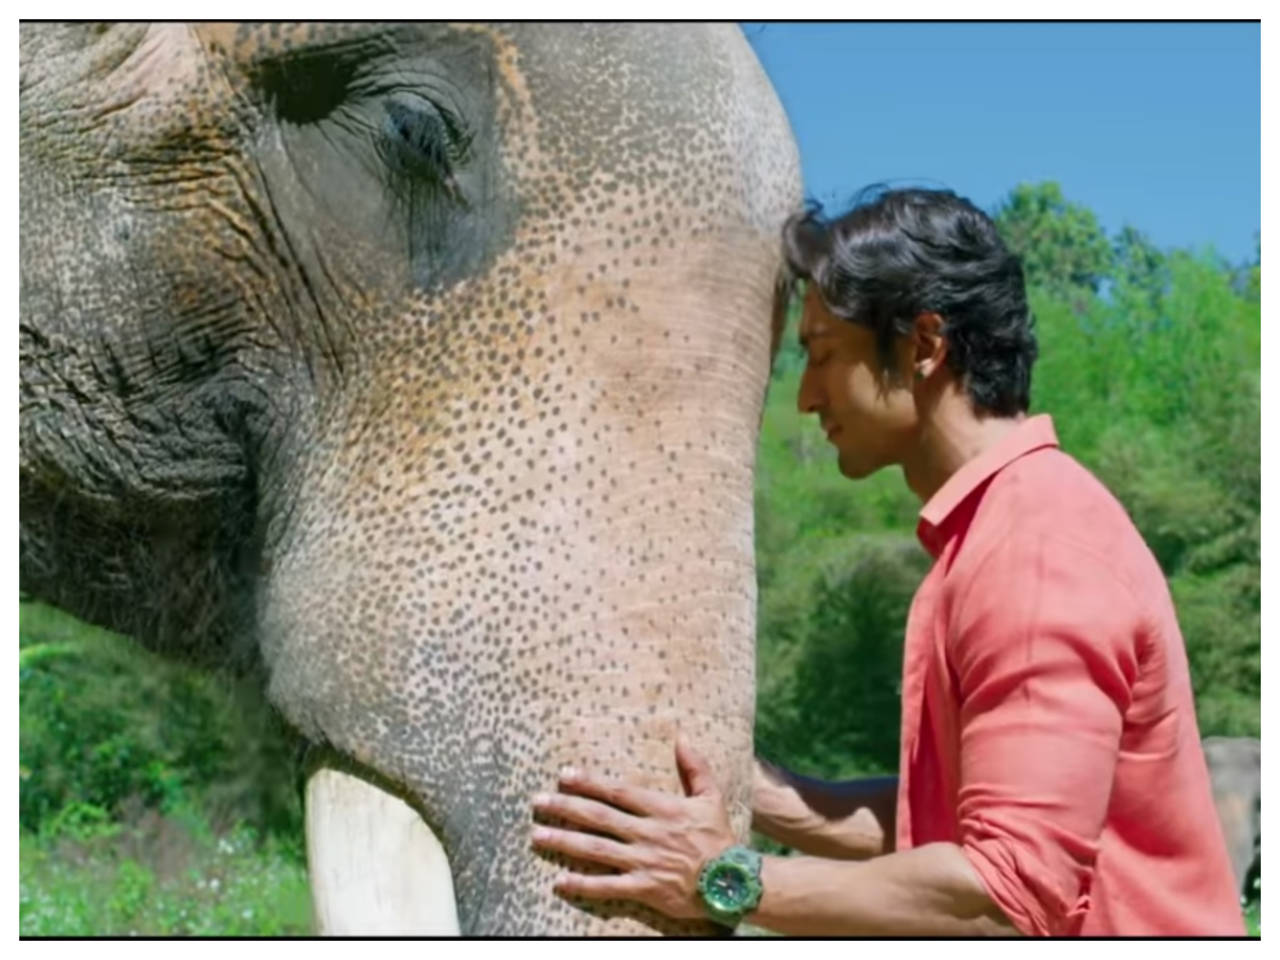 'Junglee' new song: 'Dosti' tells the tale of friendship between Vidyut  Jammwal and his elephant friend Bhola | Hindi Movie News - Times of India